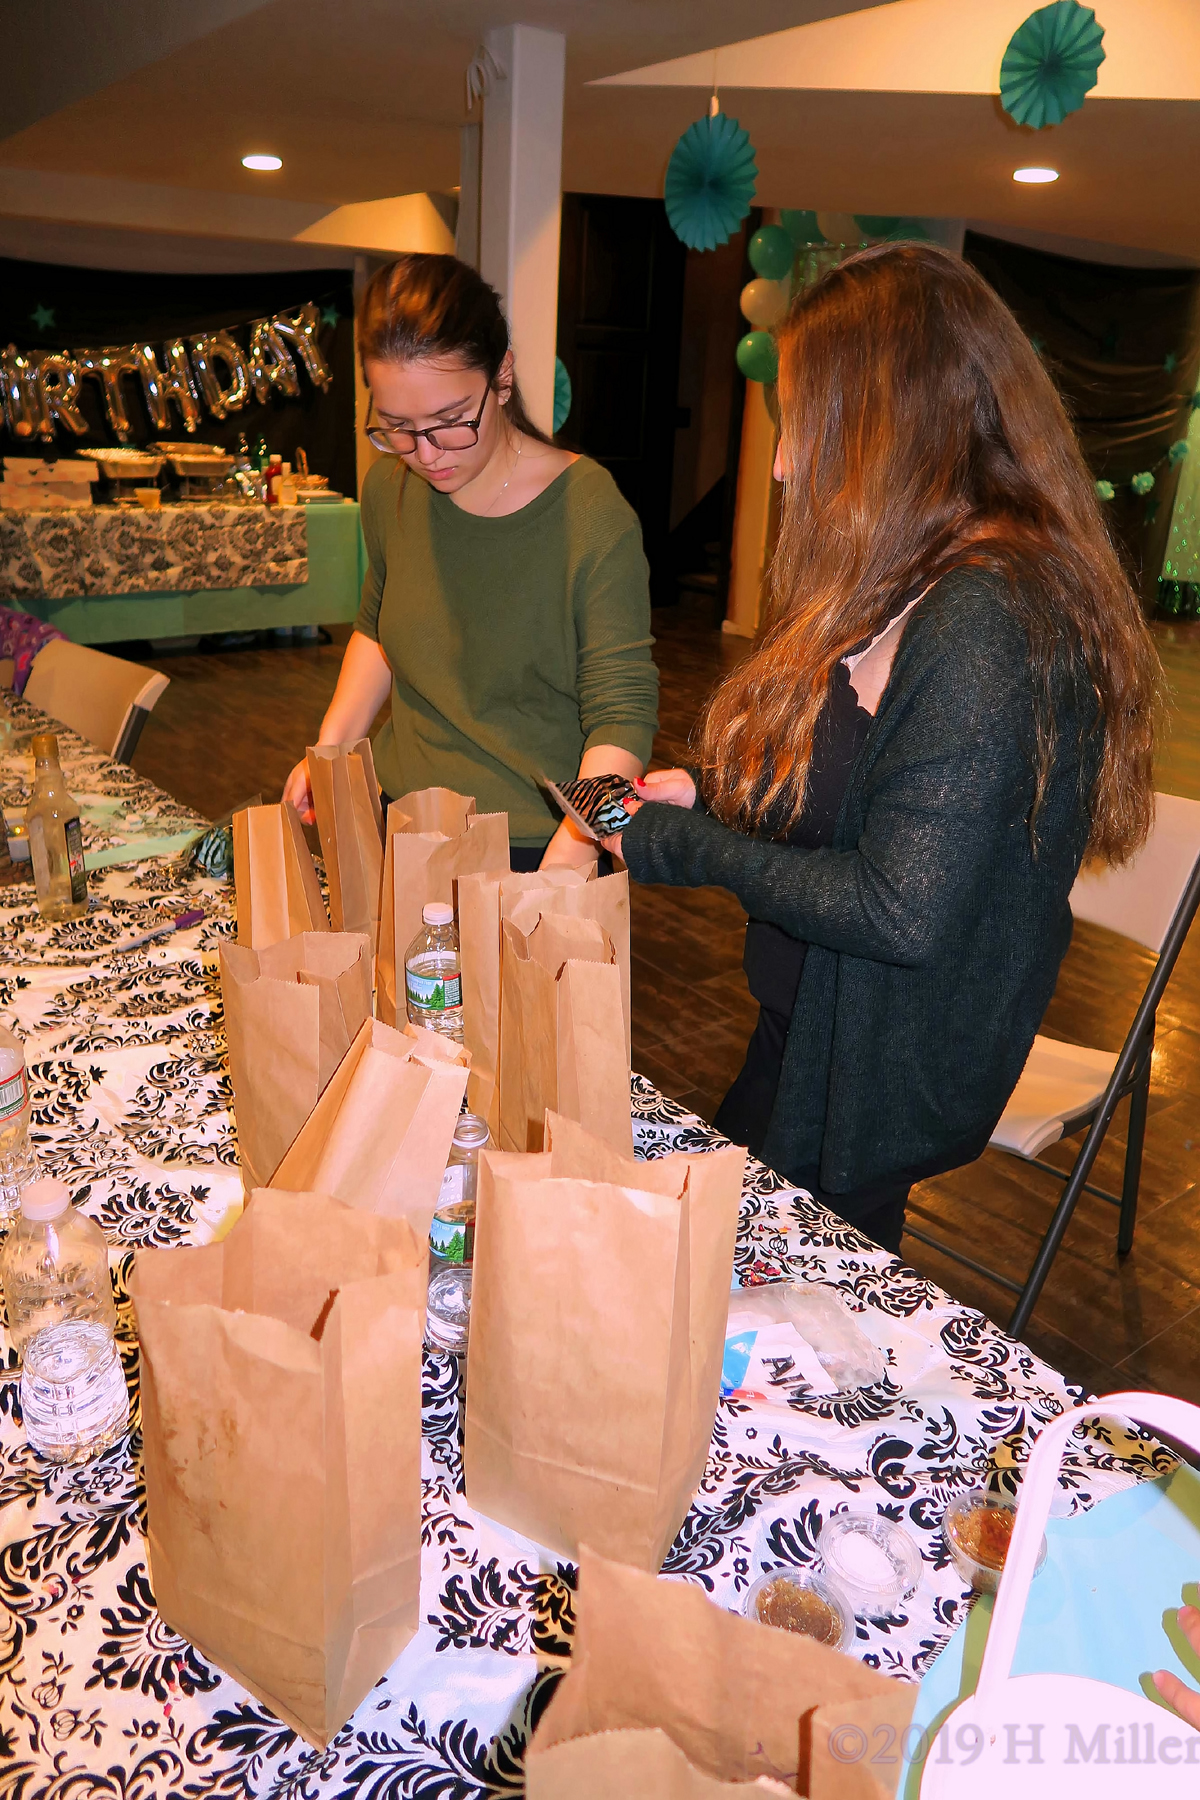 Making Memories! Kids Craft Goodie Bags For Party Guests! 1